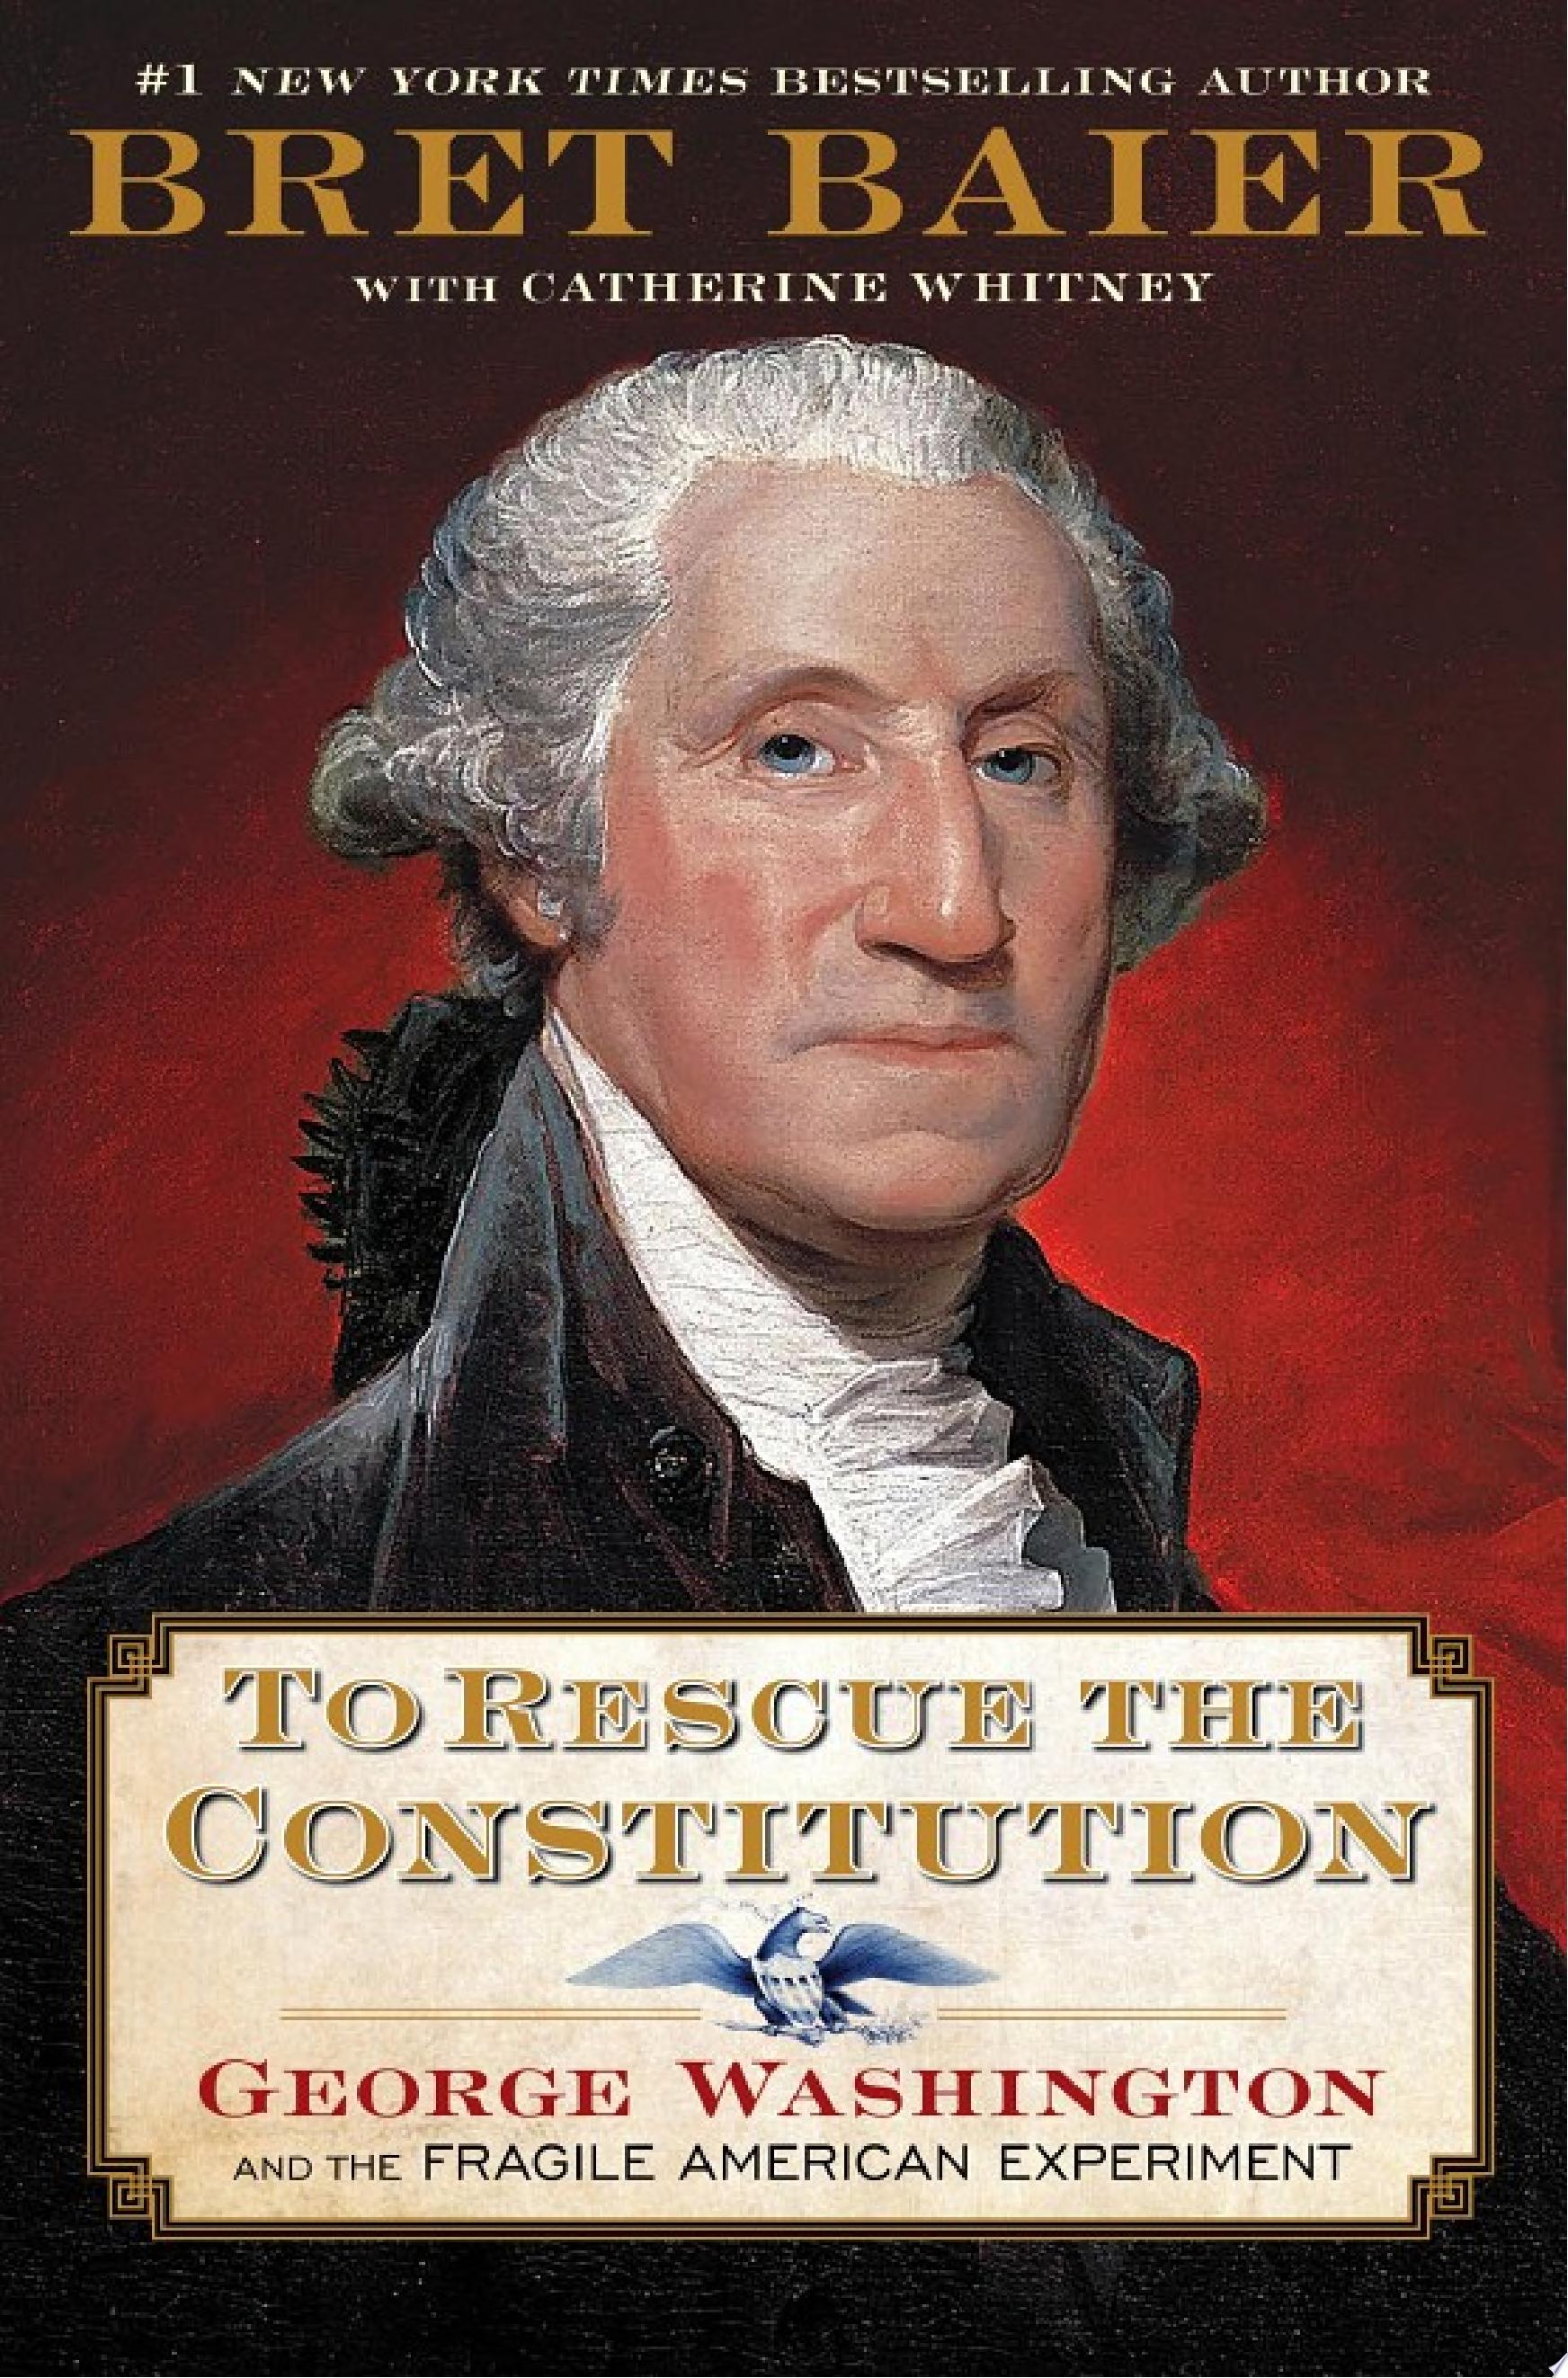 Image for "To Rescue the Constitution"